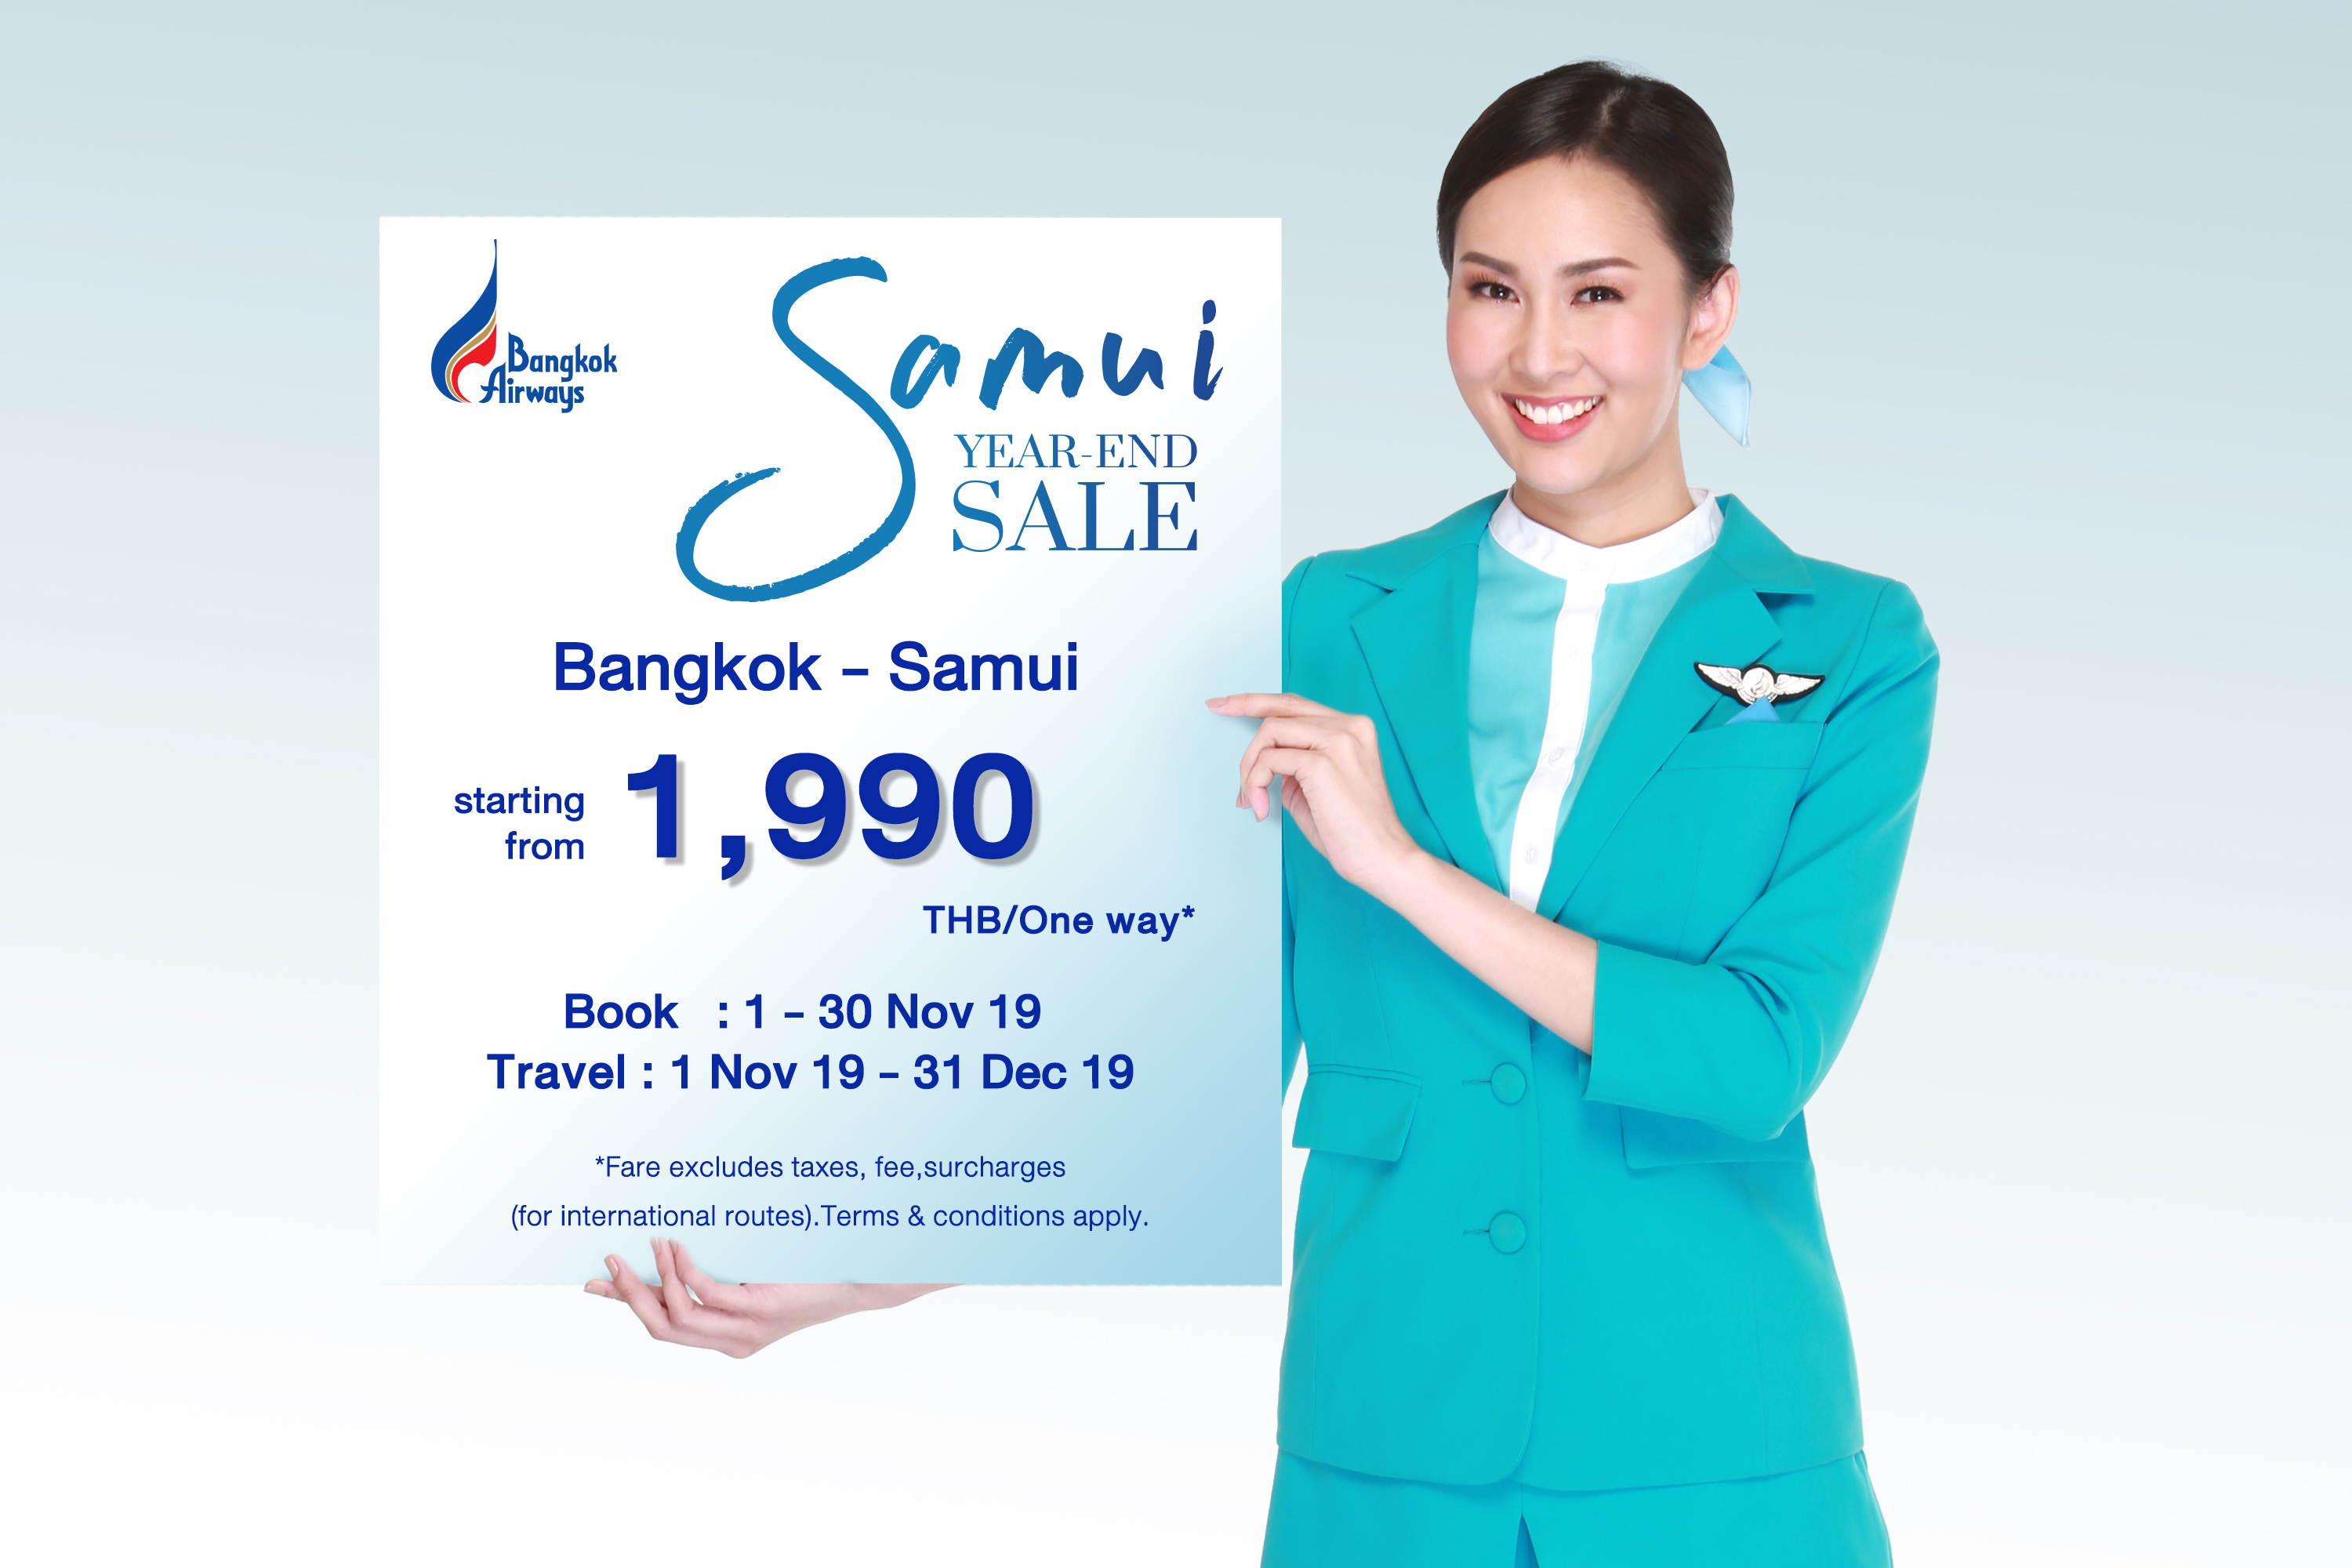 Bangkok Airways launches Samui Year End Sale Promotion